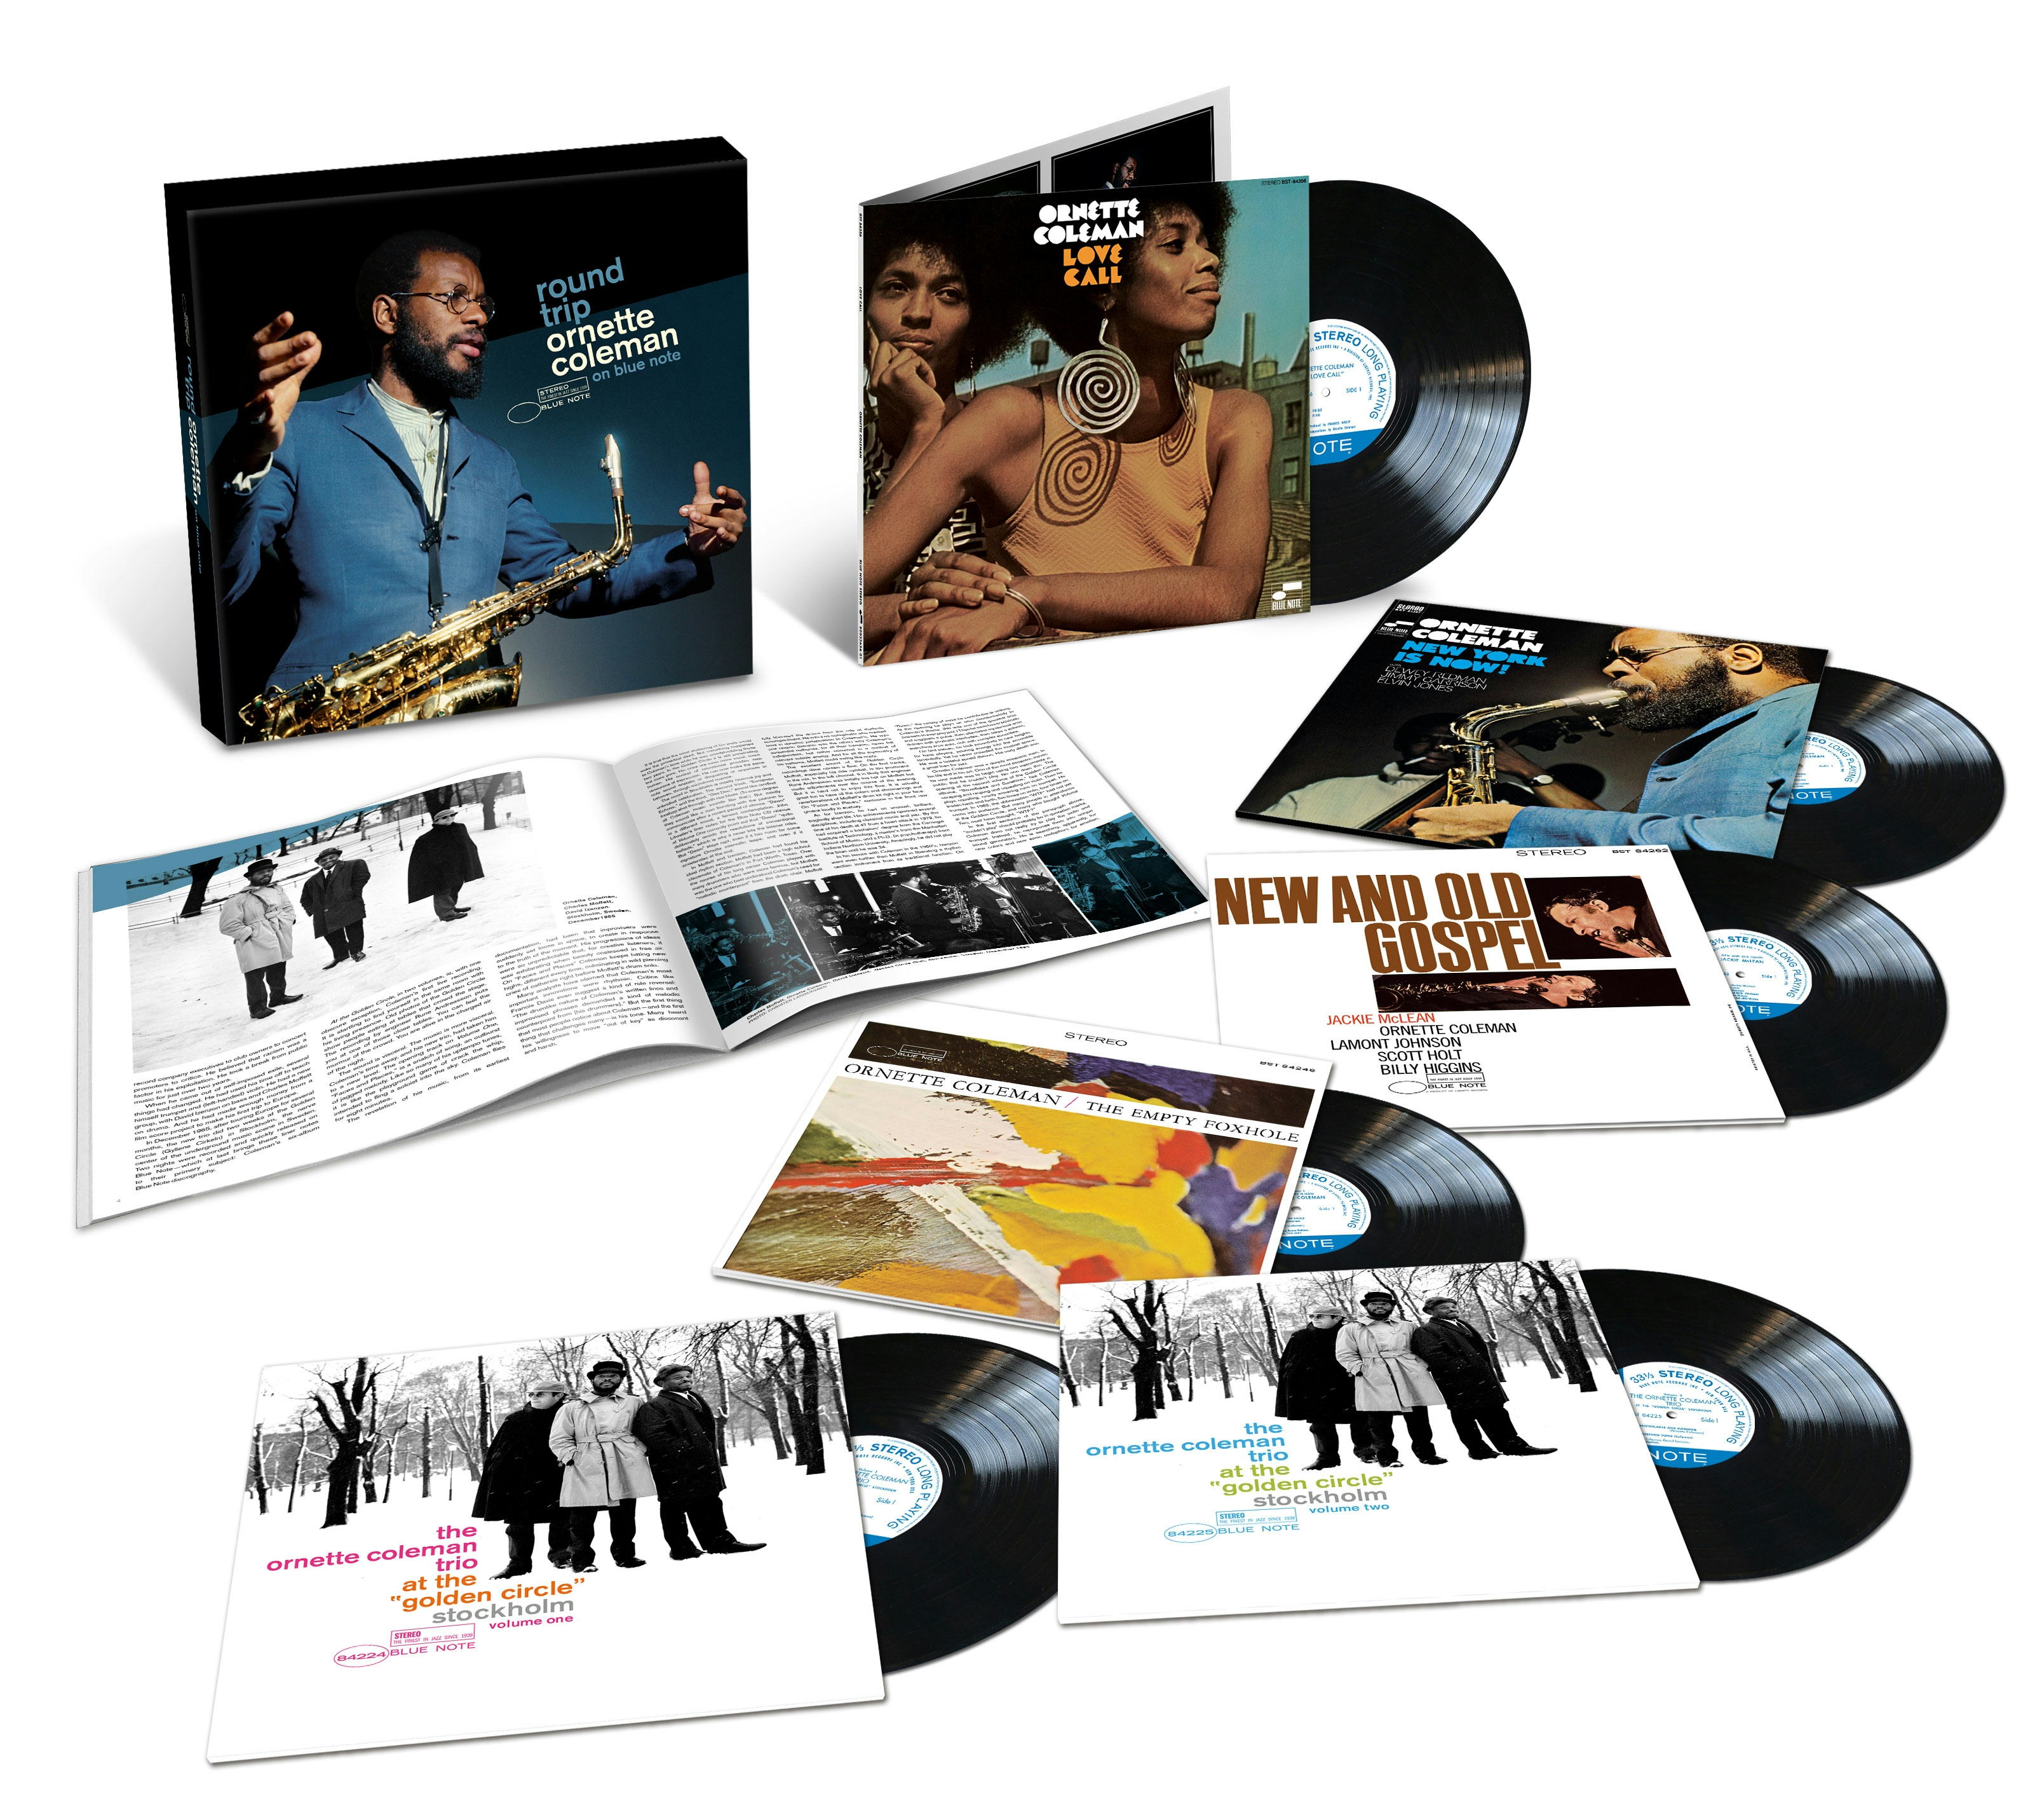 Album artwork for Round Trip: Ornette Coleman on Blue Note by Ornette Coleman